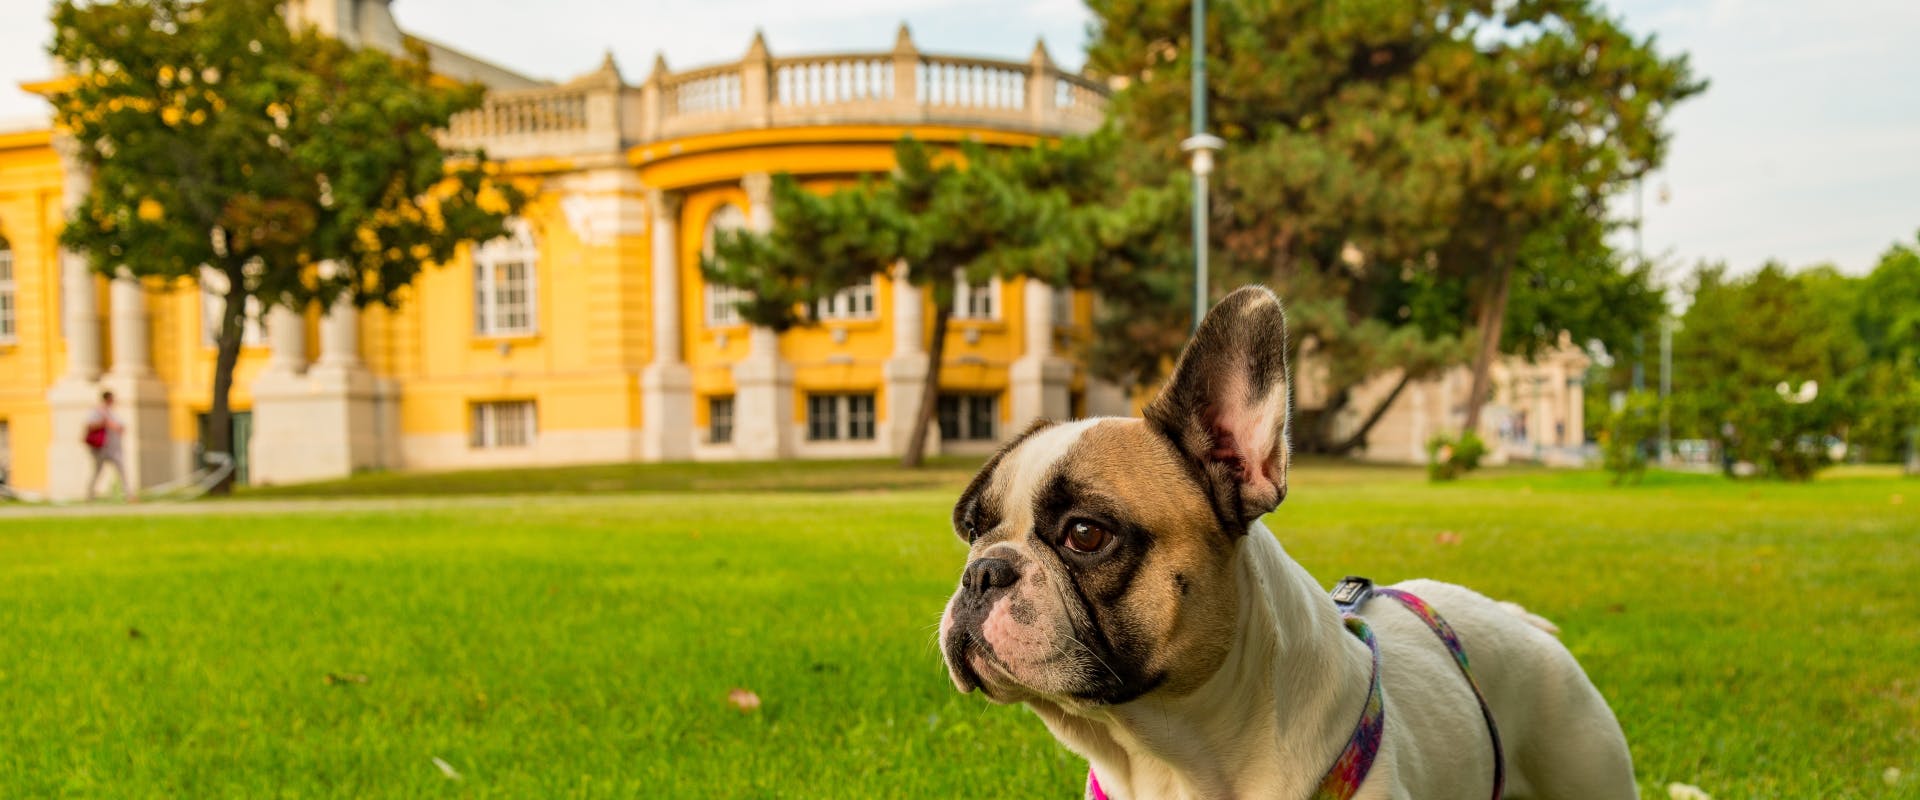 a french bulldog outside the széchenyi thermal bath house in budapest